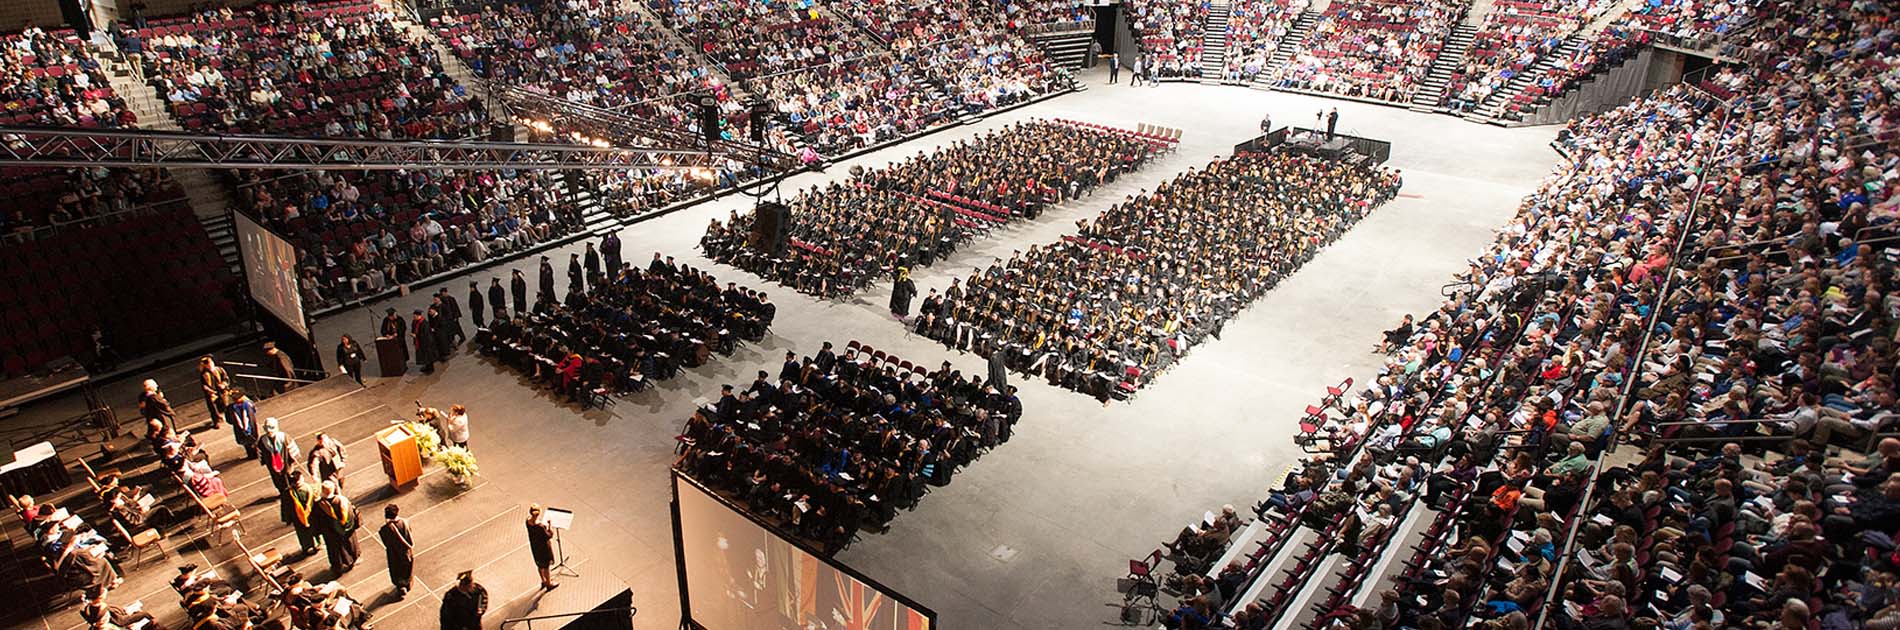 commencement exercises take place at the Cross Insurance Center